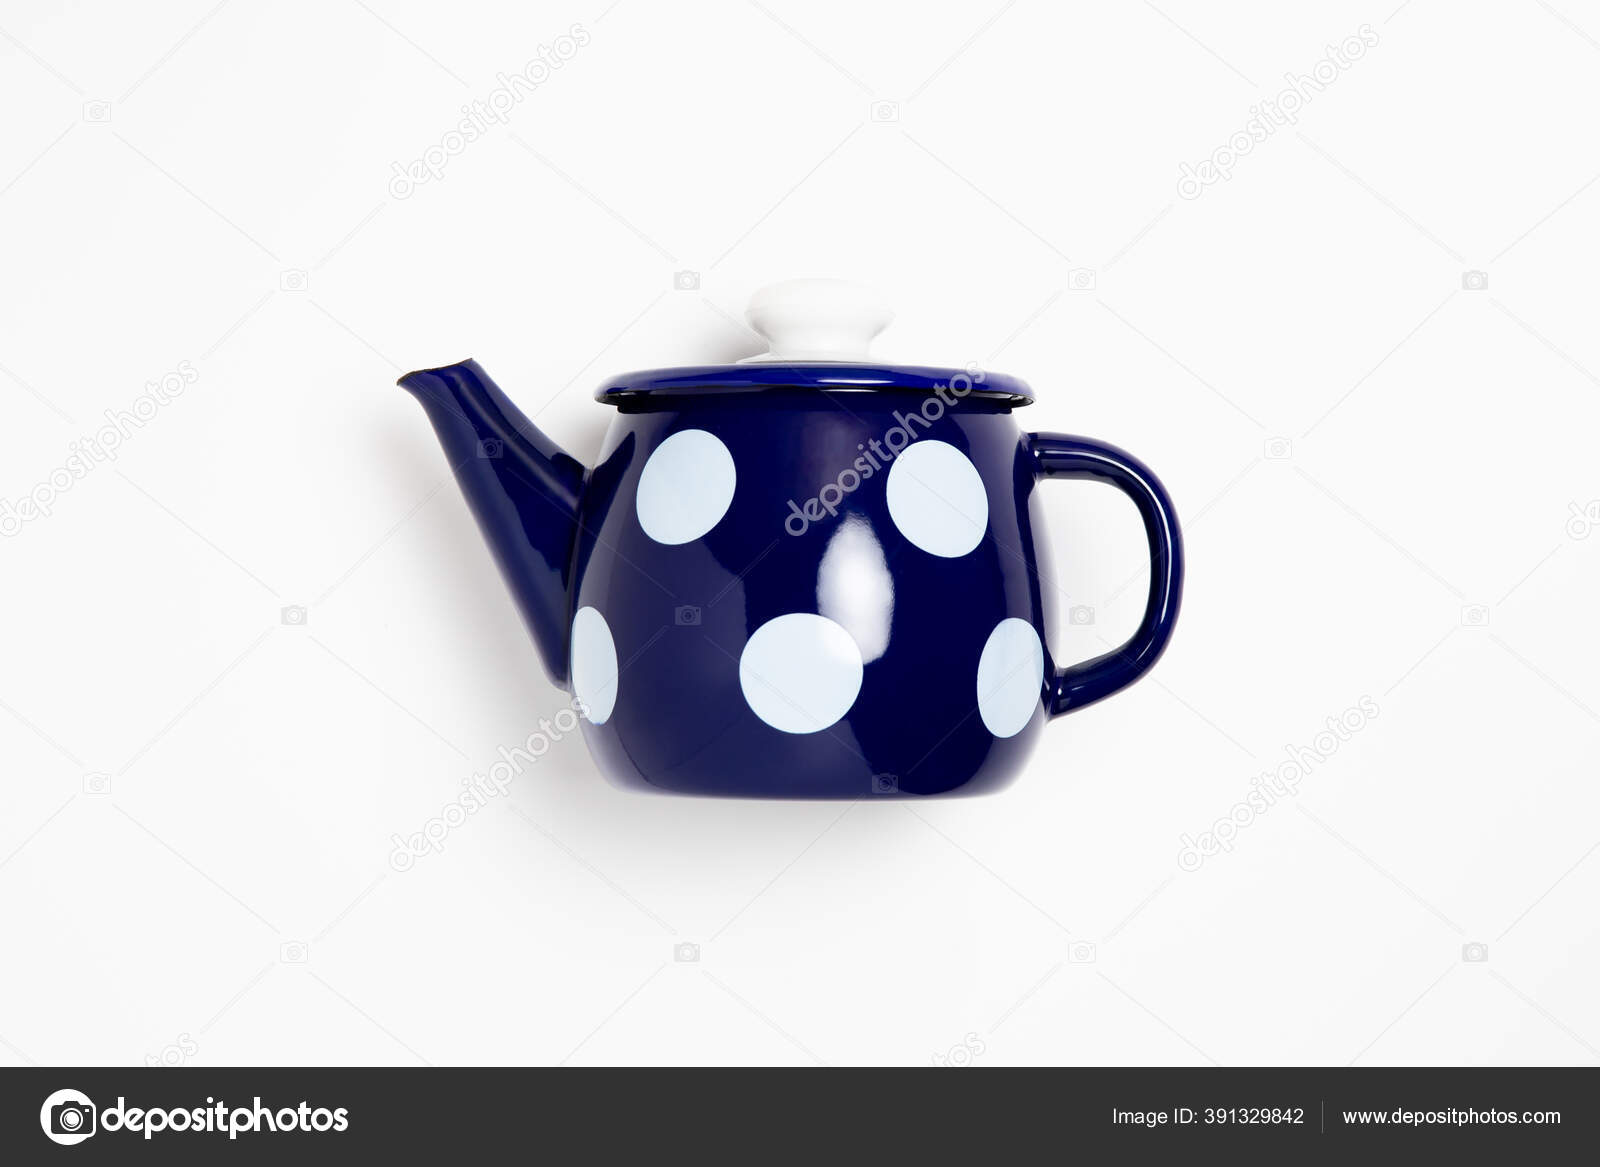 Download Enamel Teapot Mockup Isolated Clipping Path Enamel Tea Coffee Pot Stock Photo Image By C Sabirio Mail Ru 391329842